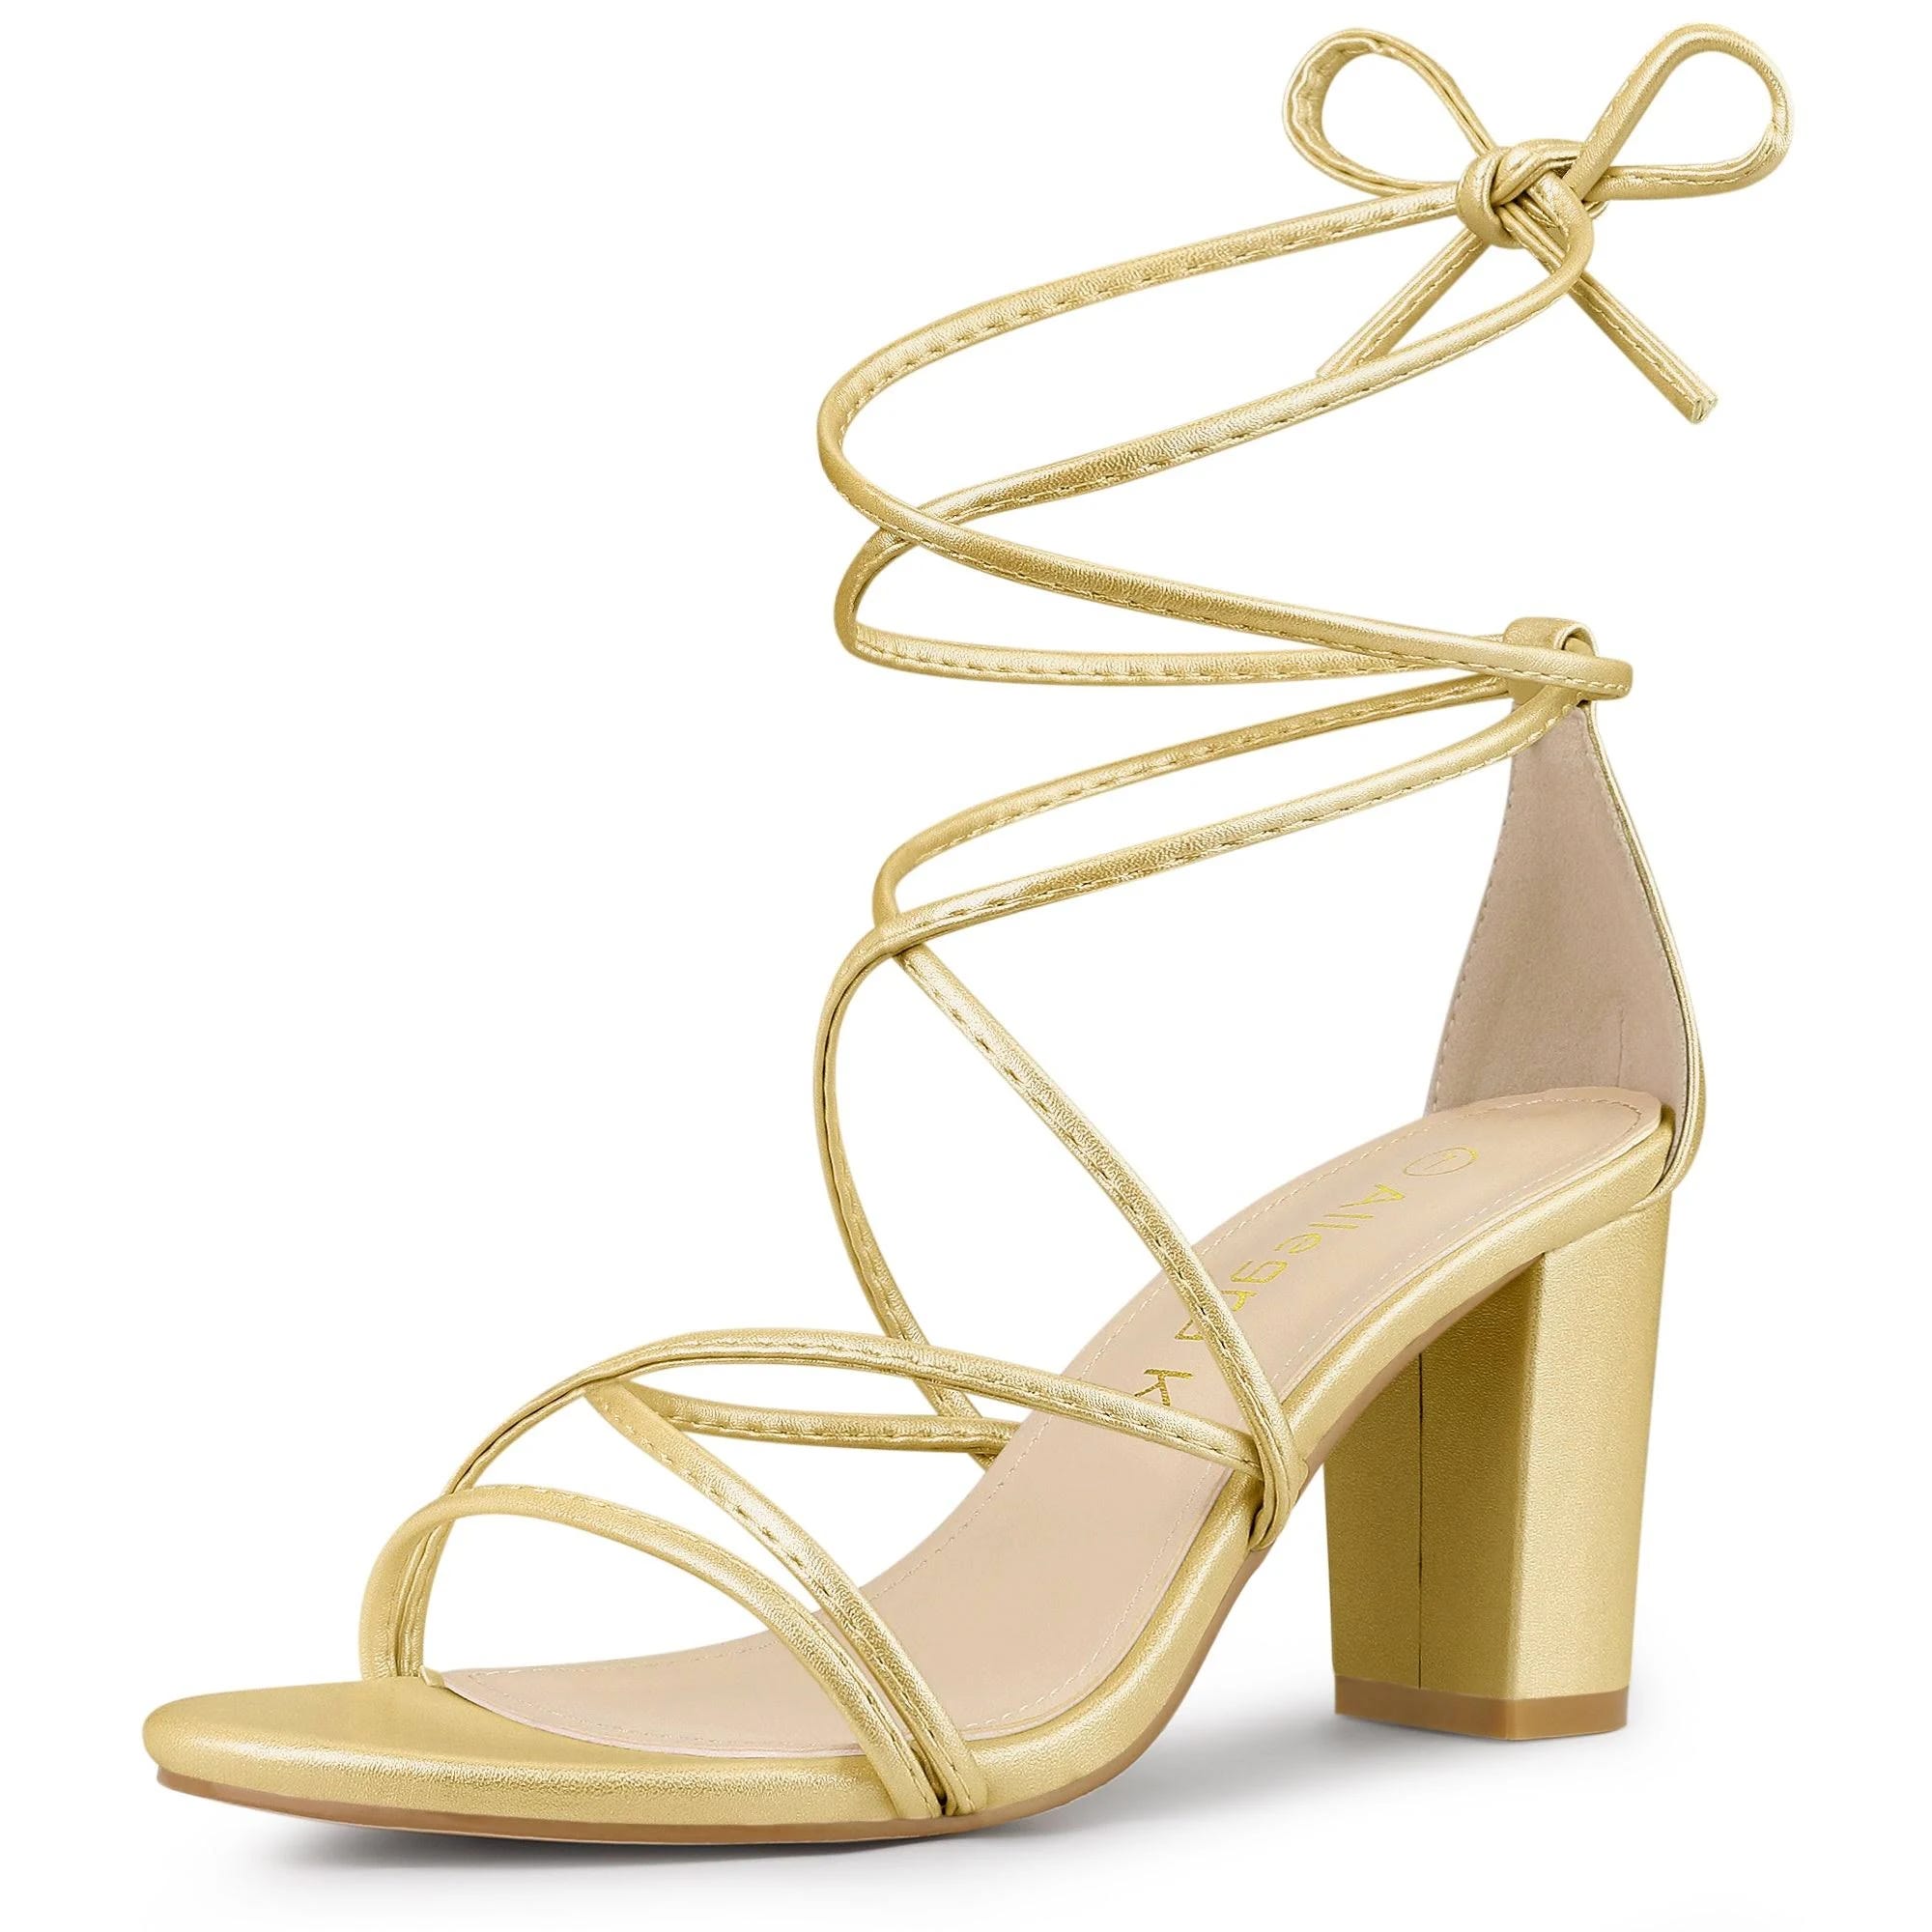 Golden Chunky Strappy Heels with PU Vamp | Image